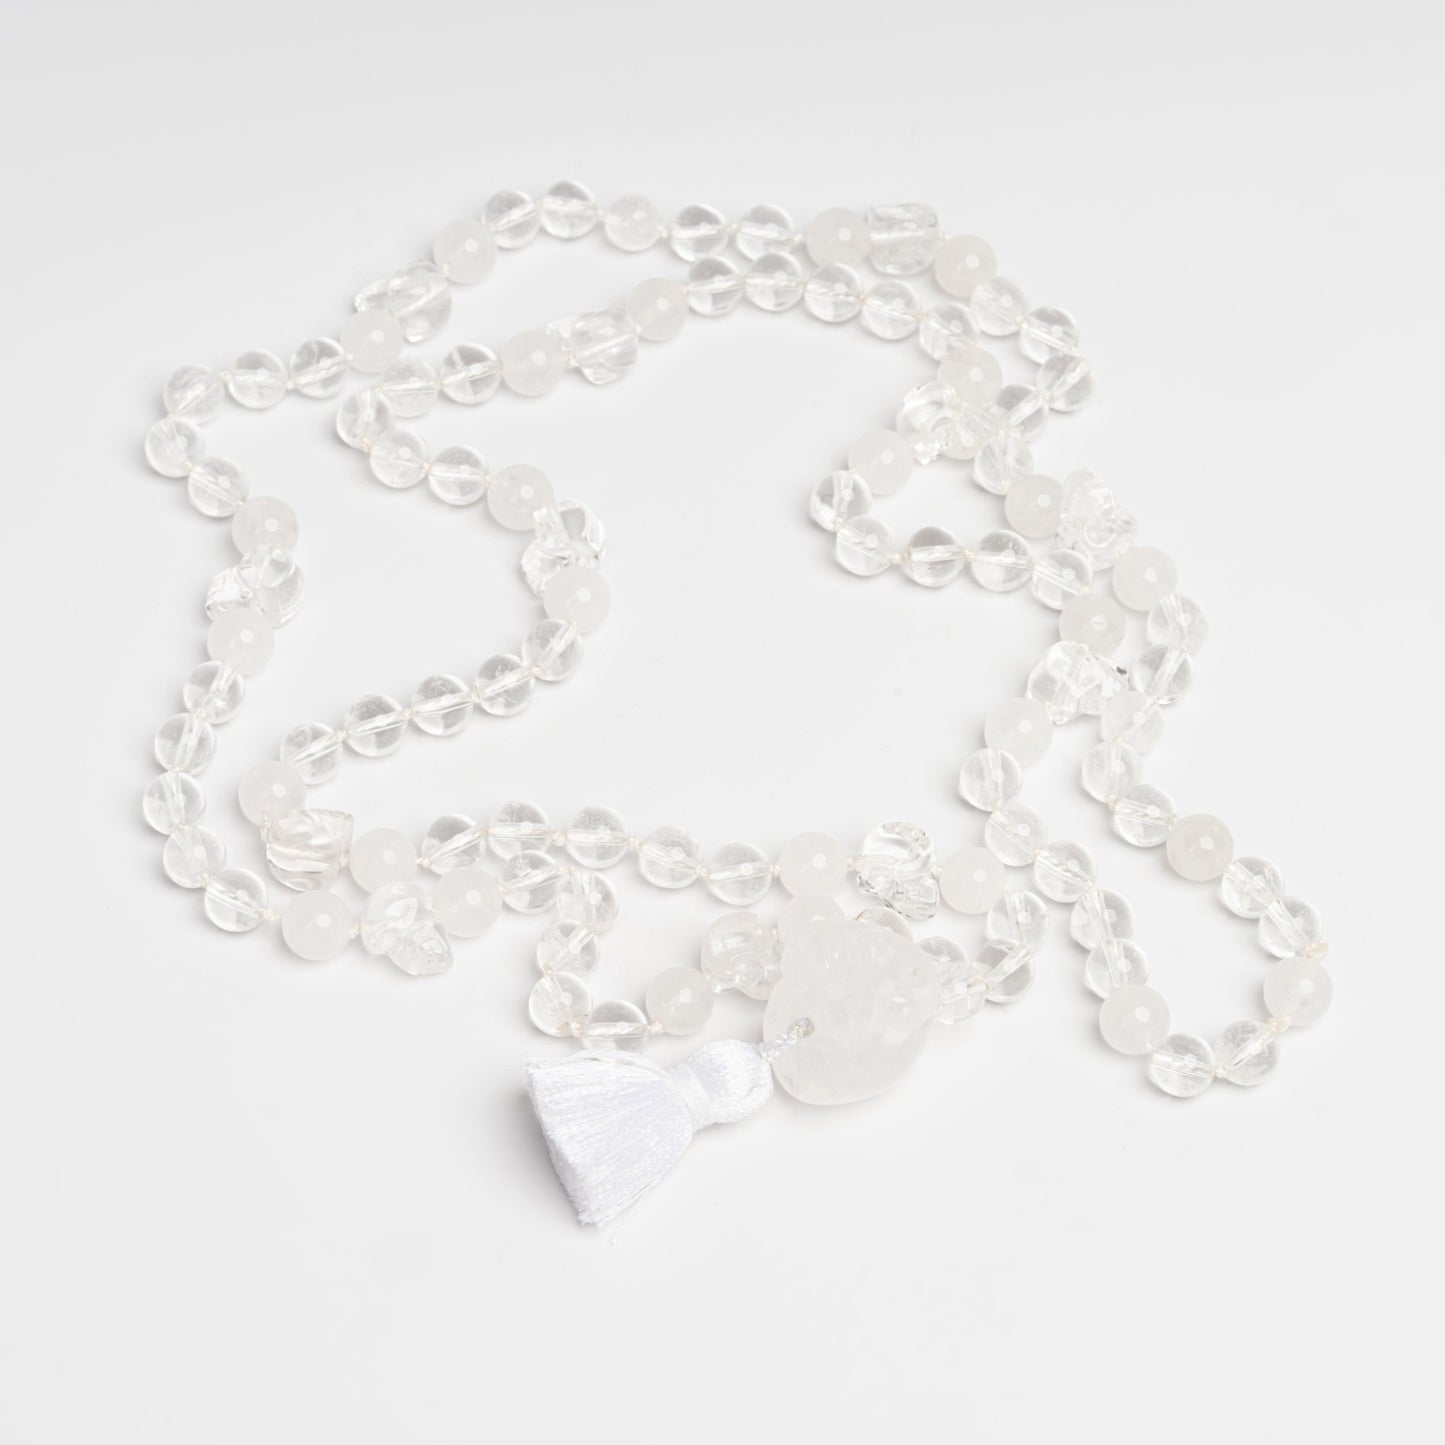 Clearer Connection Mala Necklace